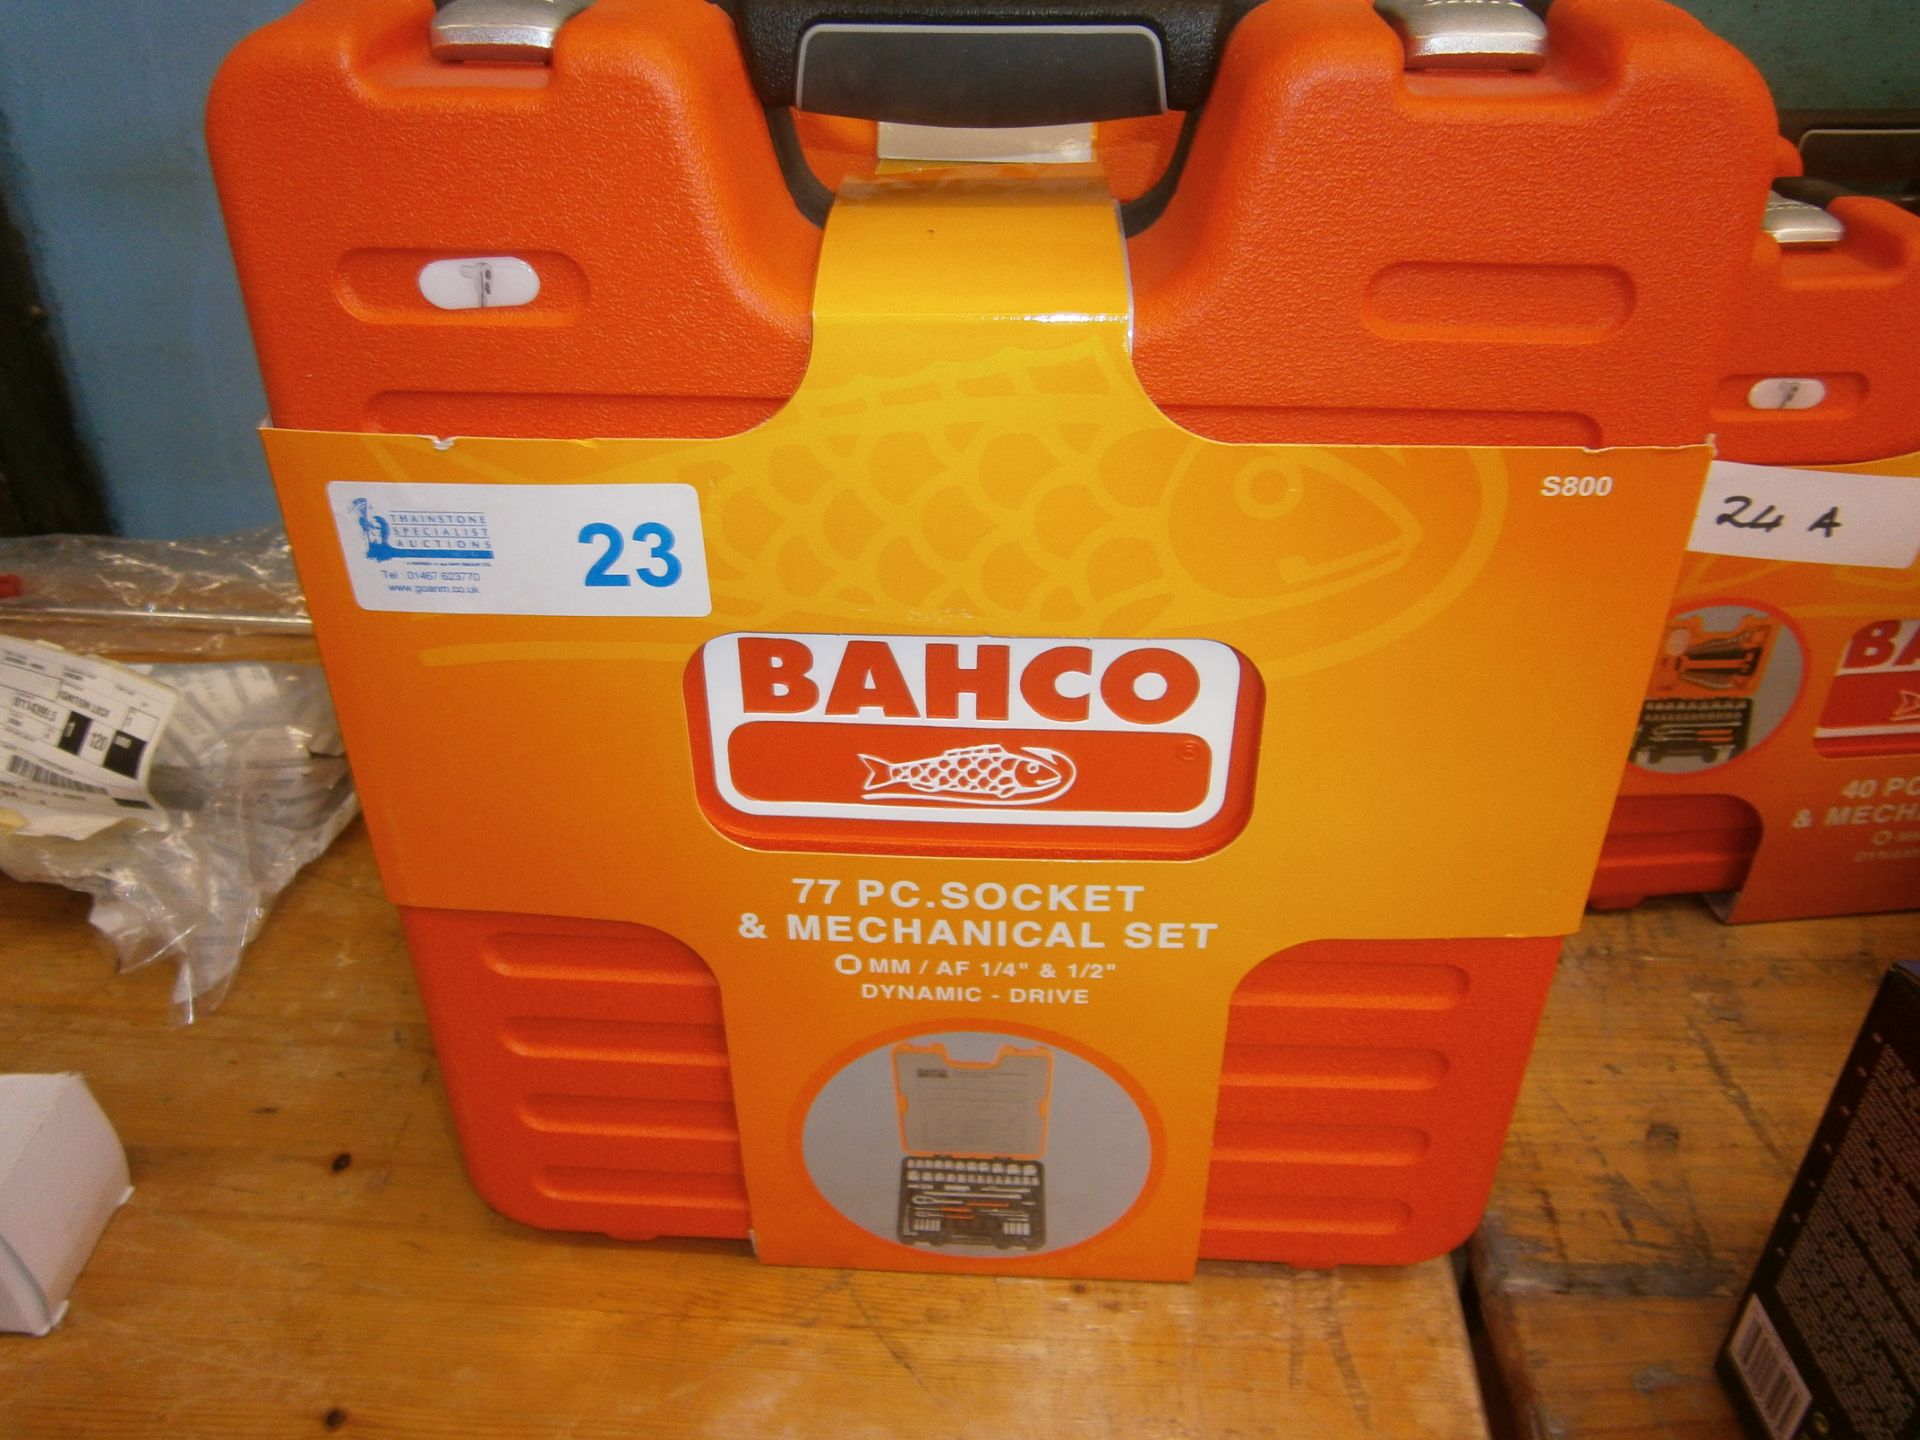 Bahco 77 Piece Socket And Mechanical Set